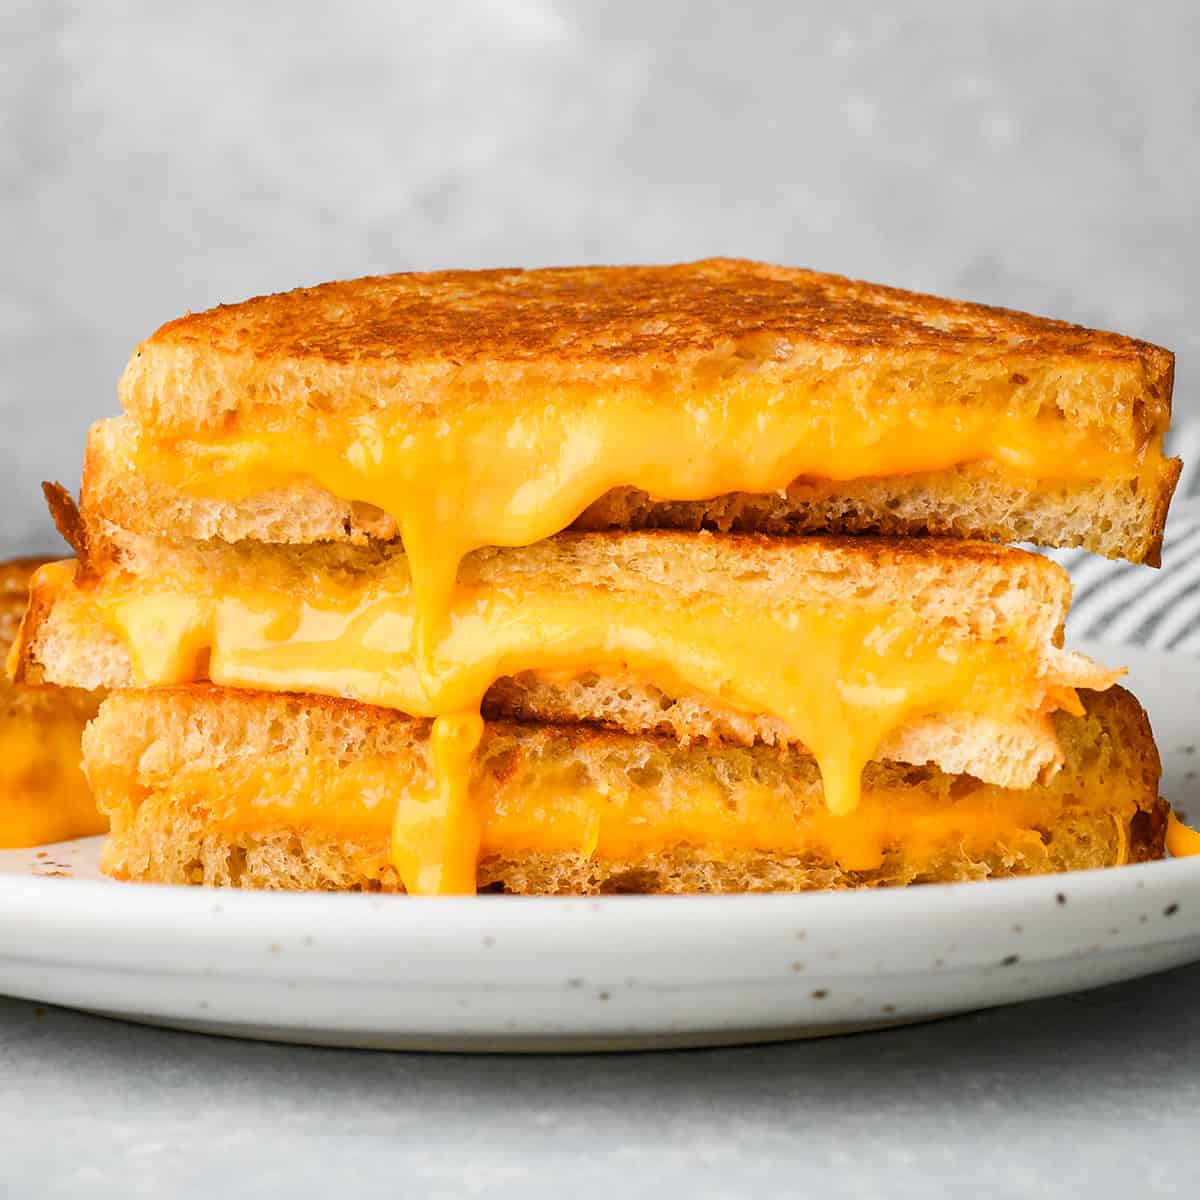  a stack of three halves of a grilled cheese sandwich